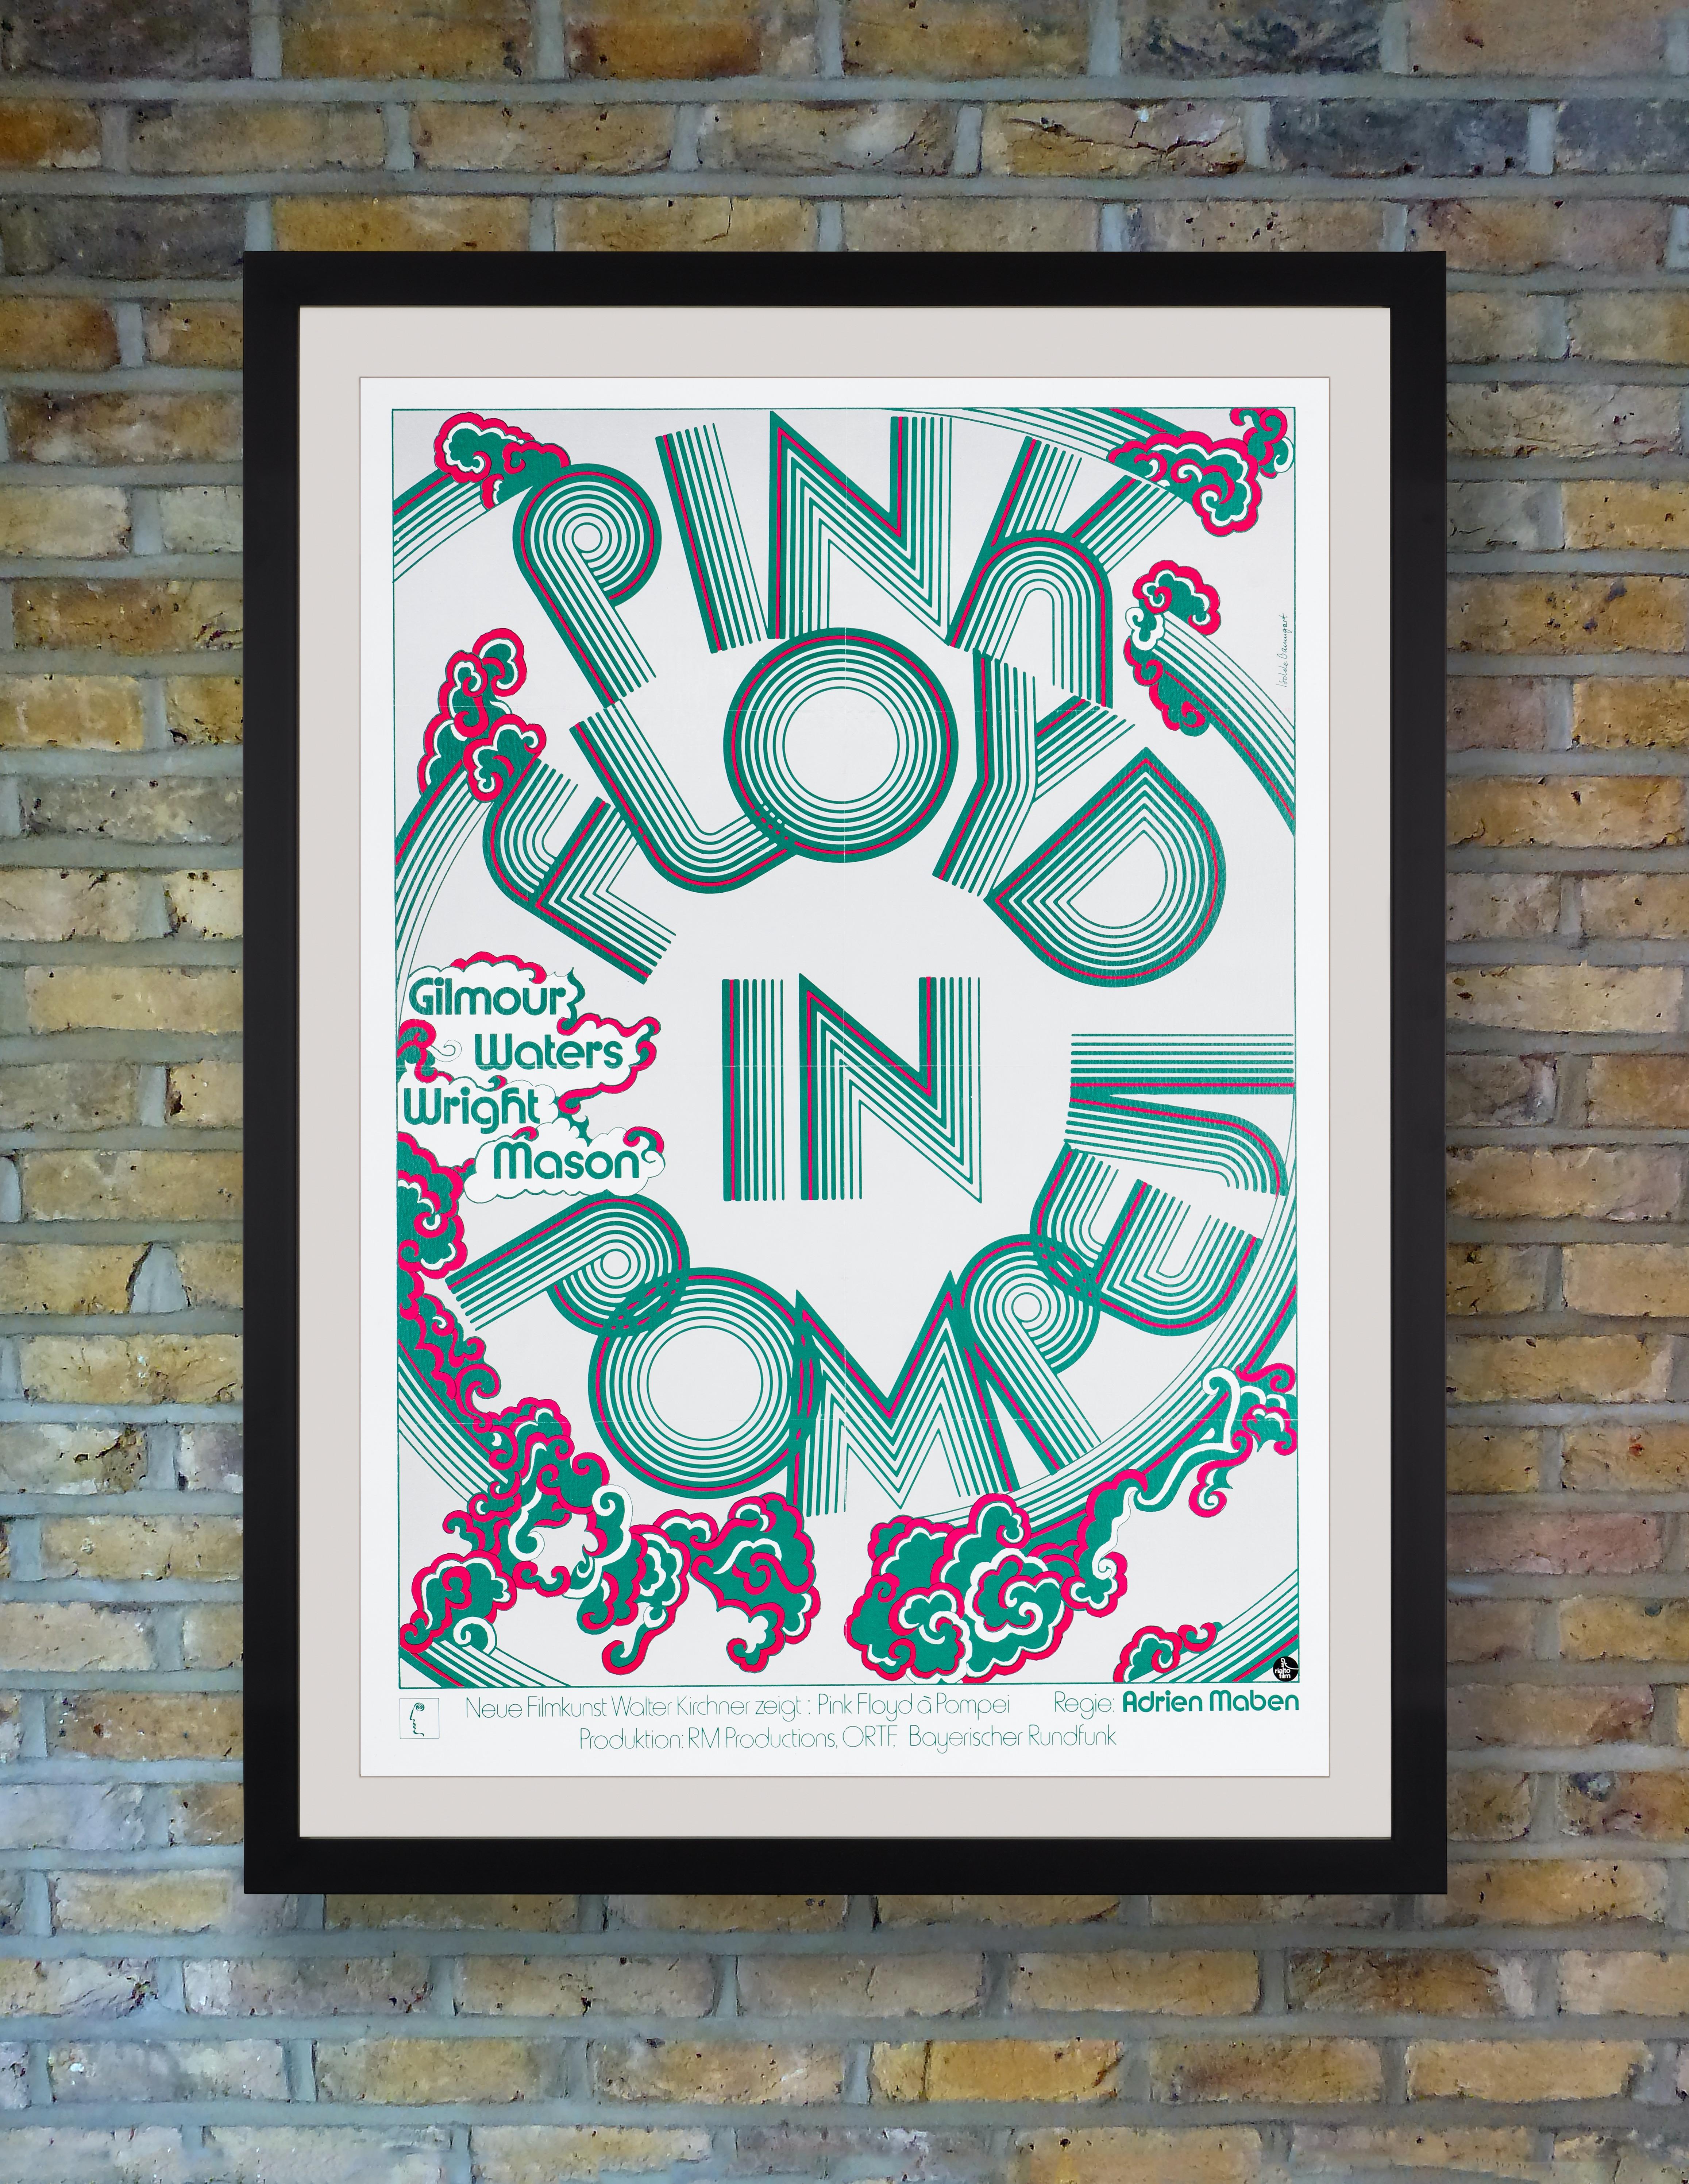 Art Deco meets psychedelia on this stunning pink and green poster by Isolde Baumgart for the original German release of Pink Floyd’s legendary 1972 concert documentary film ‘Pink Floyd: Live at Pompeii.’ One of the chief designers employed by the